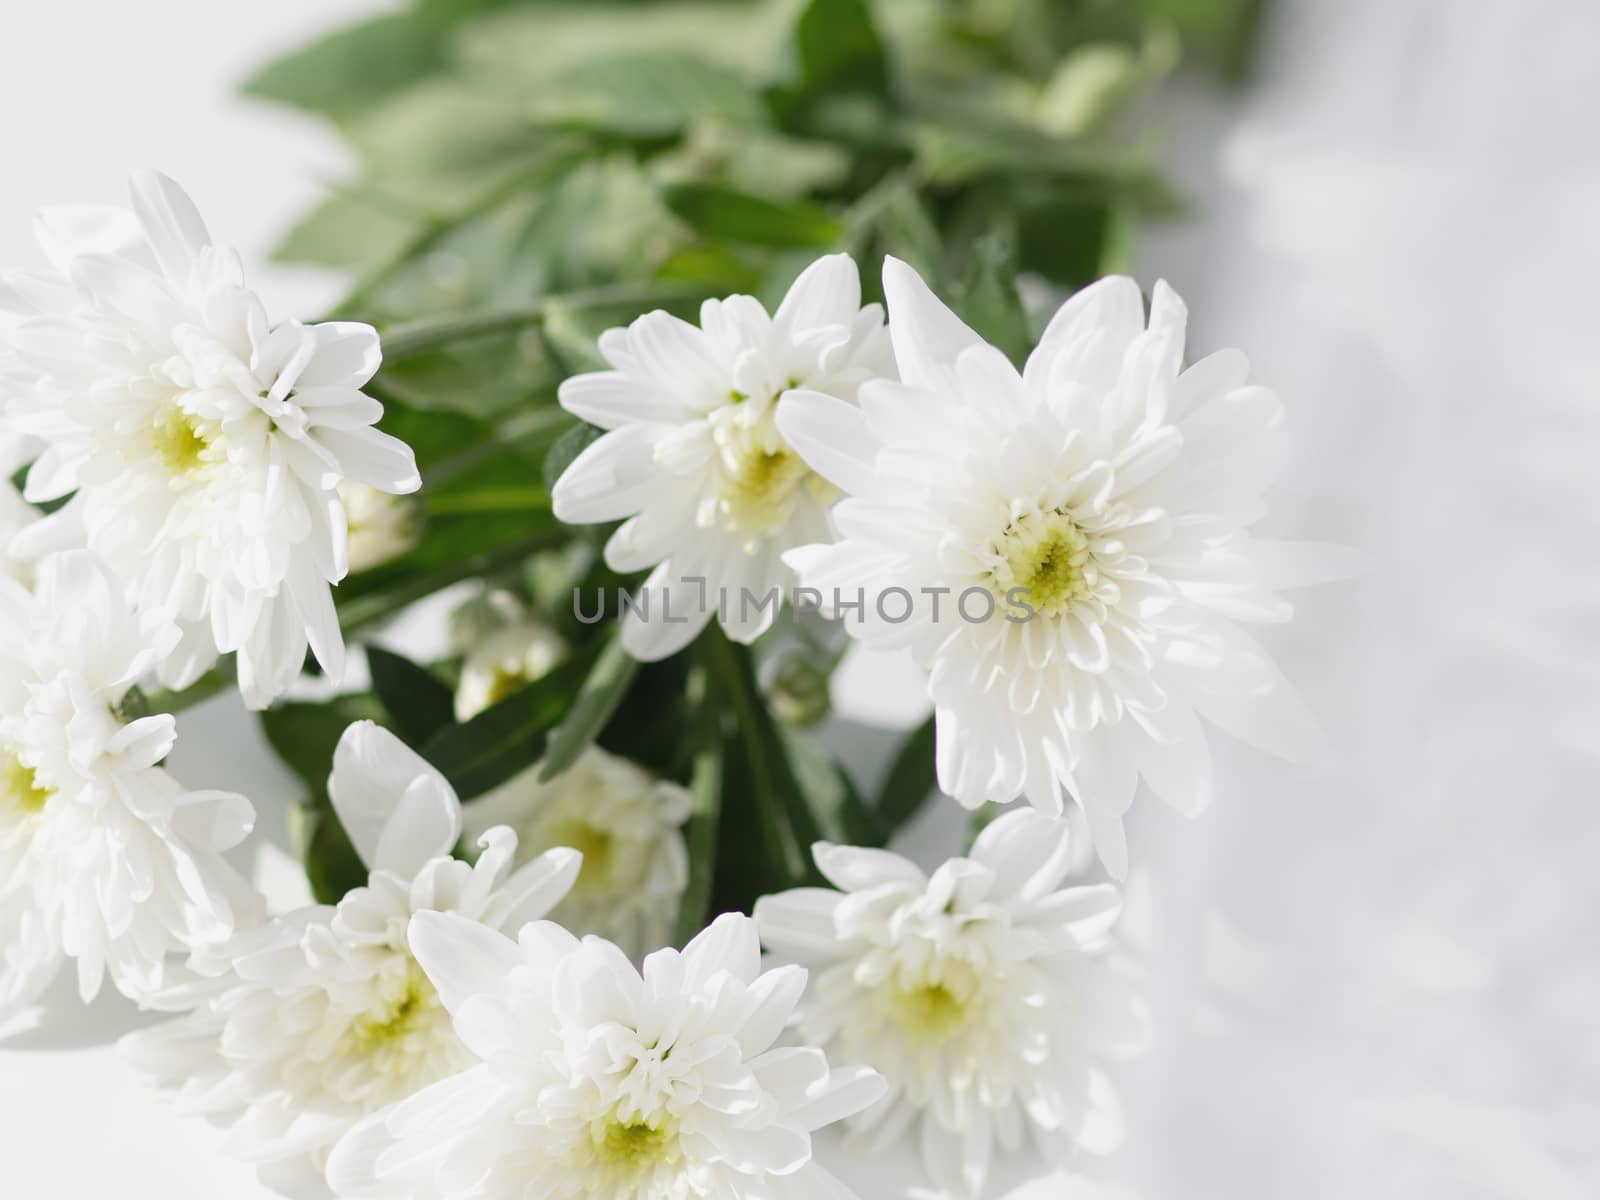 Macro photo of chrysanthemum flowers on window sill. Sunny morning in cozy home.